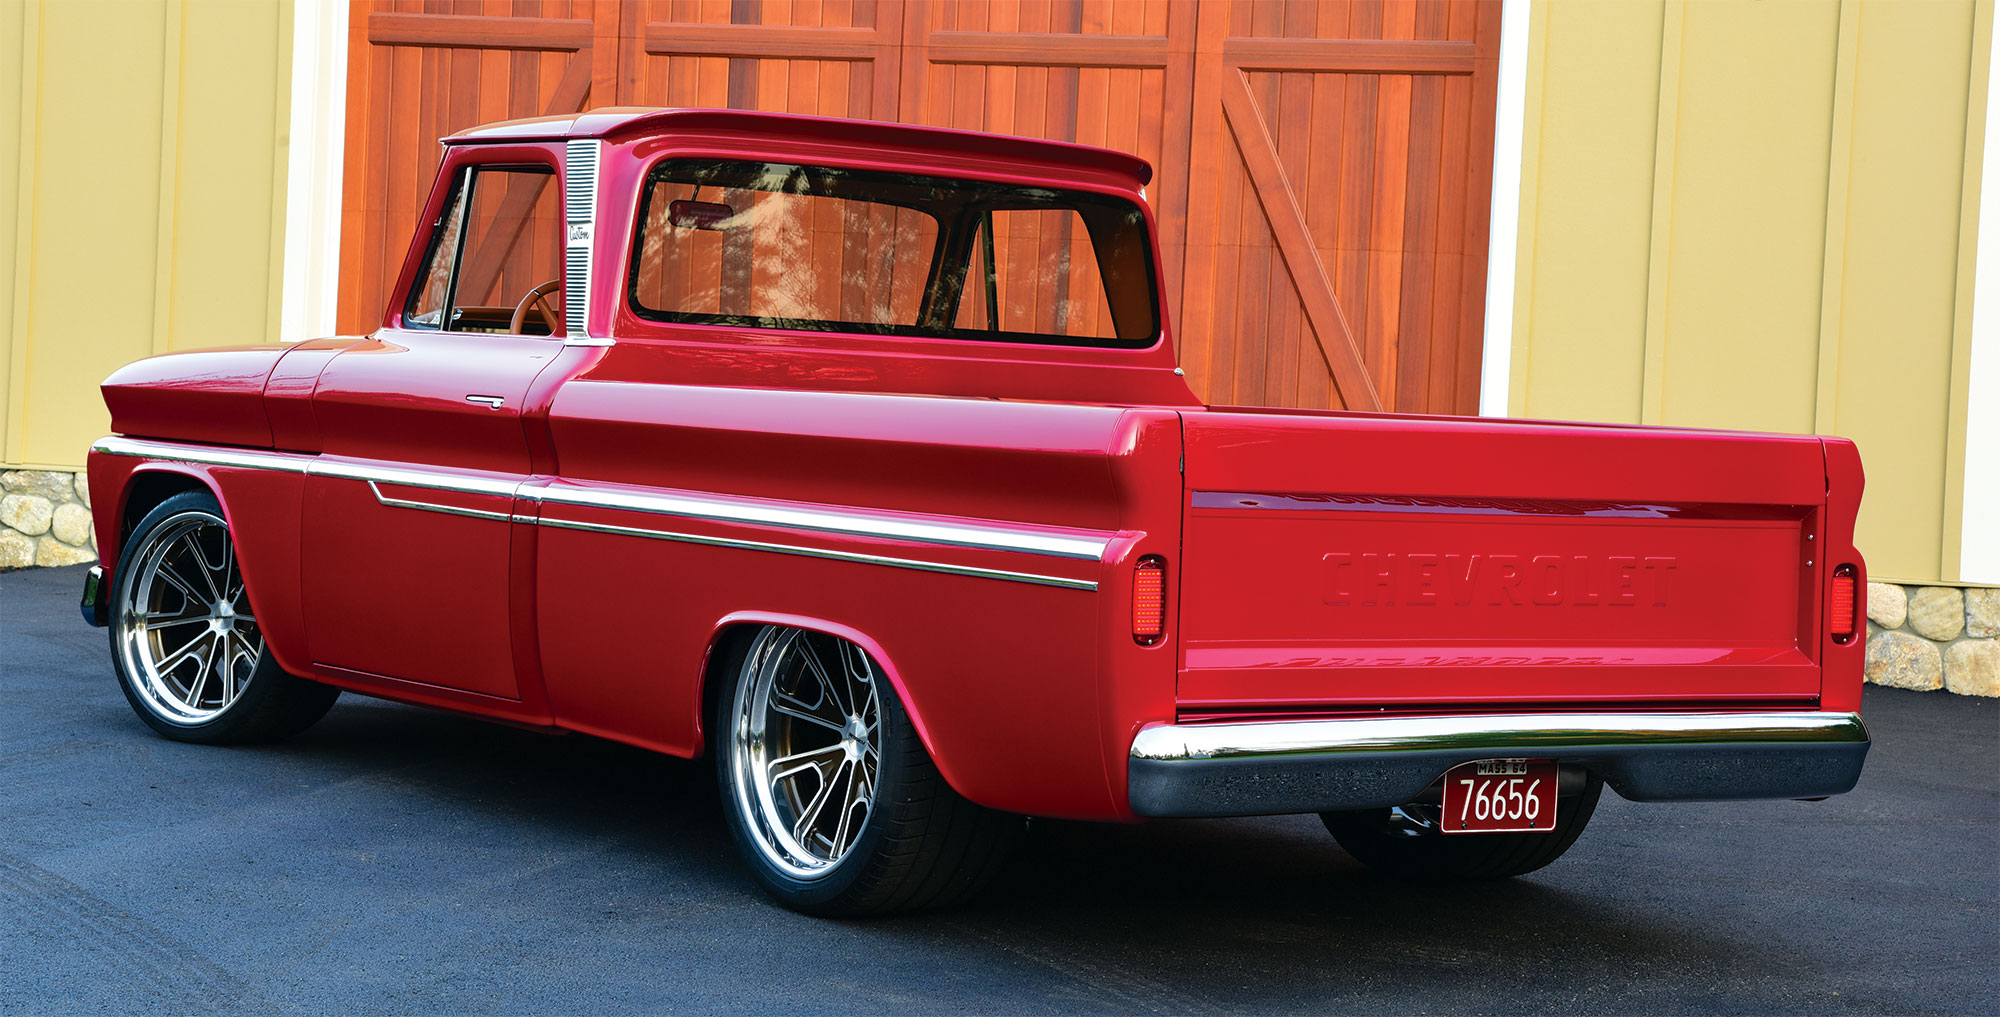 1965 Chevy C10 rear view of bumper and trunk